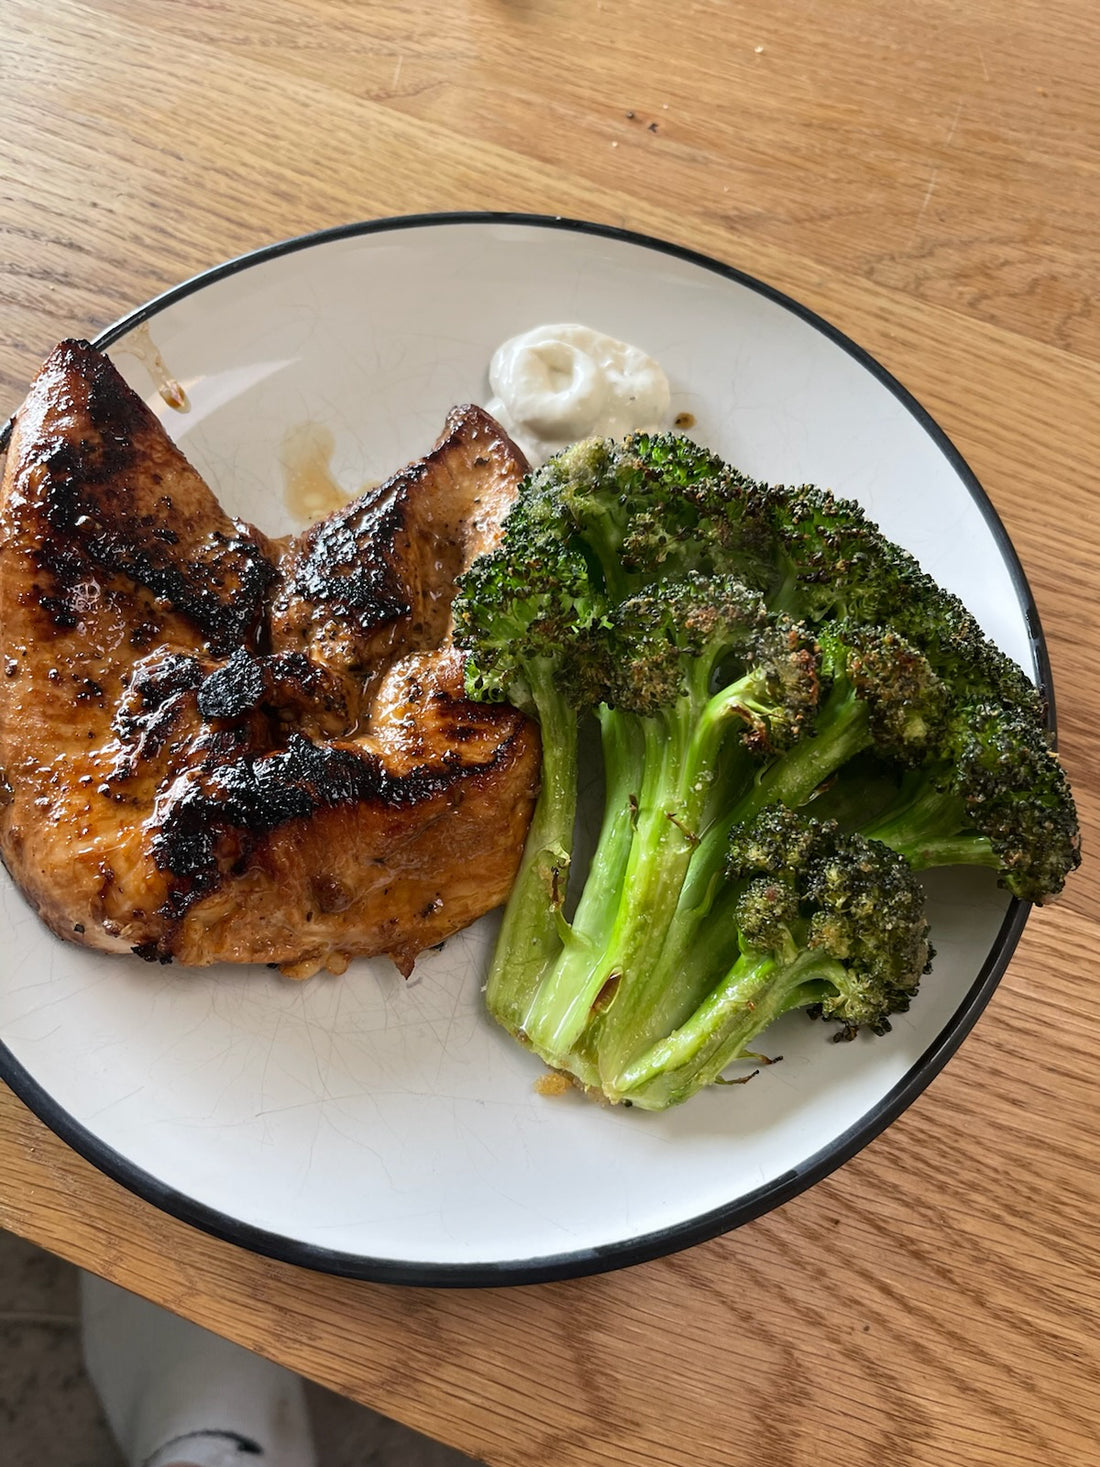 Chicken & Broccoli with Traditional 'Uala